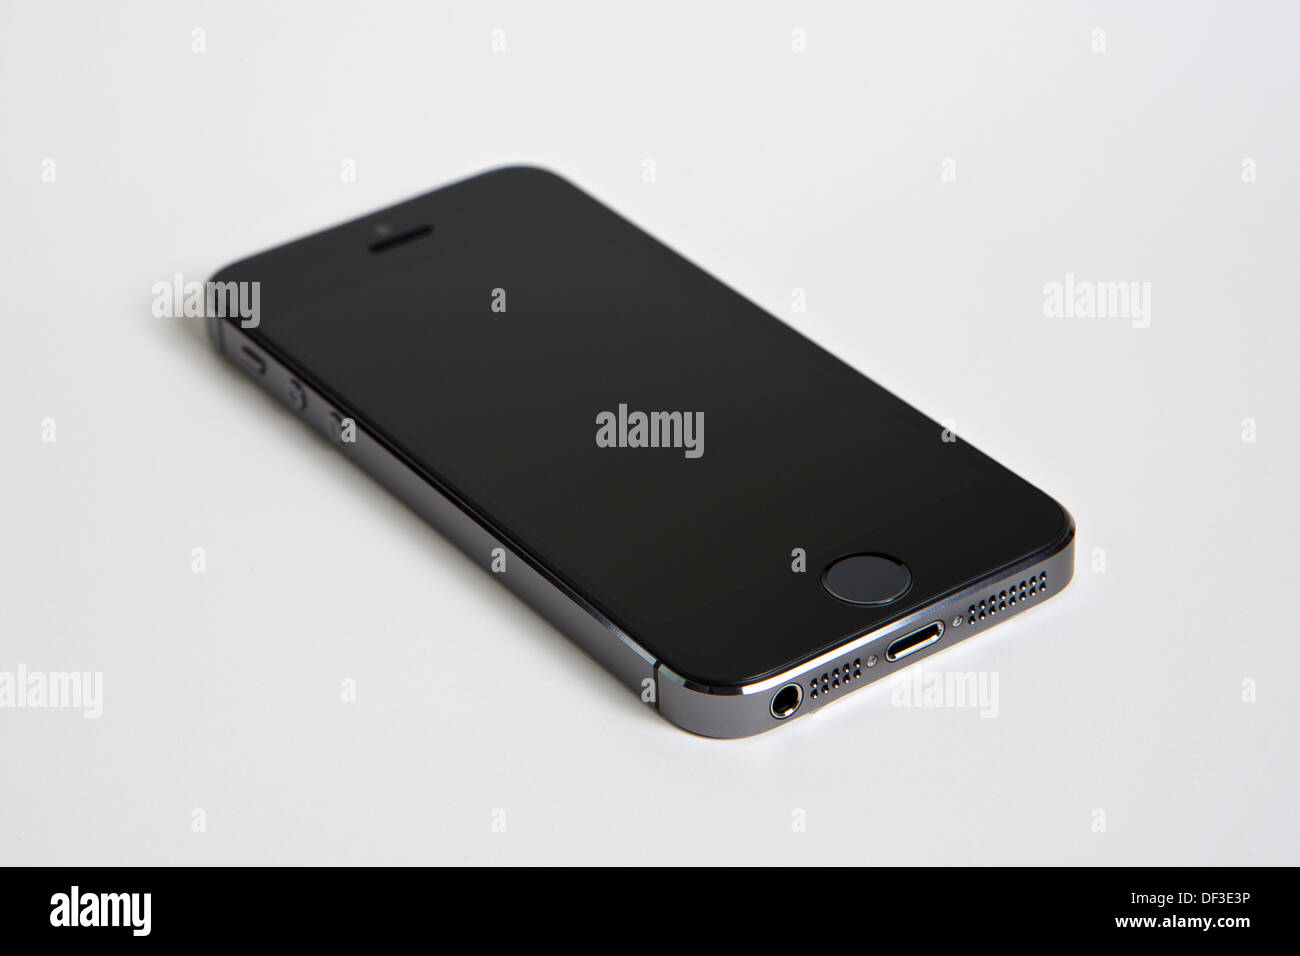 Apple iPhone 5S in space grey color Stock Photo